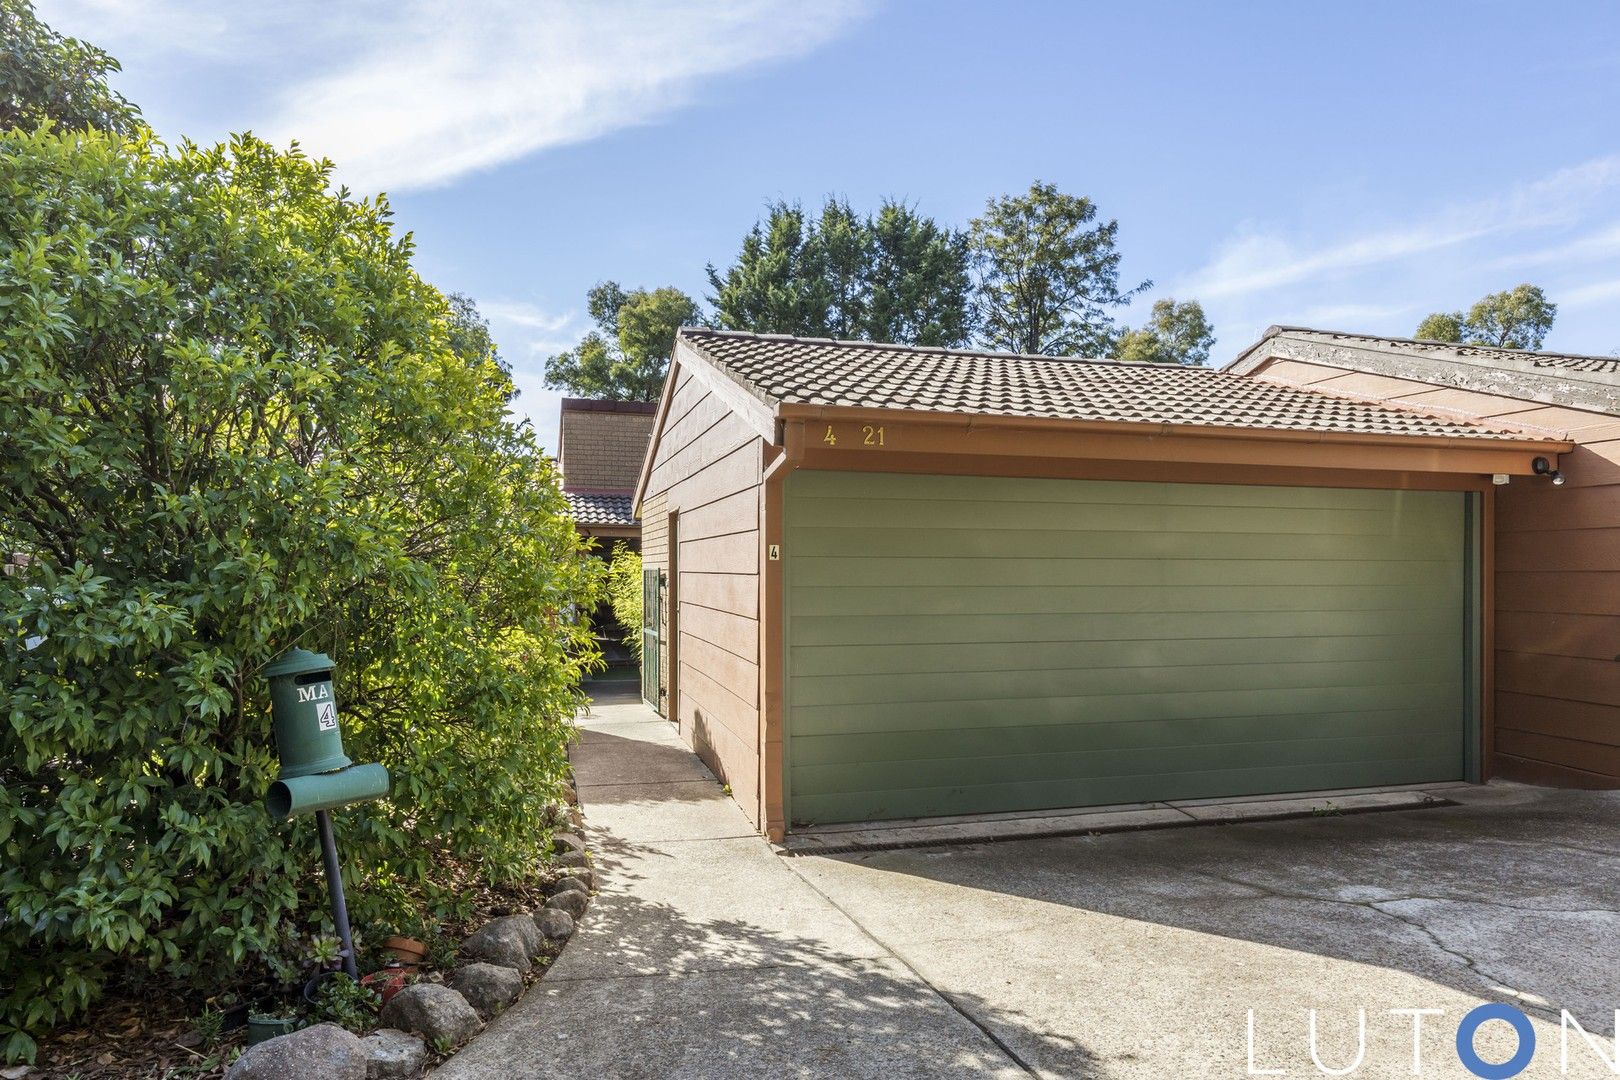 4/21 Hargrave Street, Scullin ACT 2614, Image 0